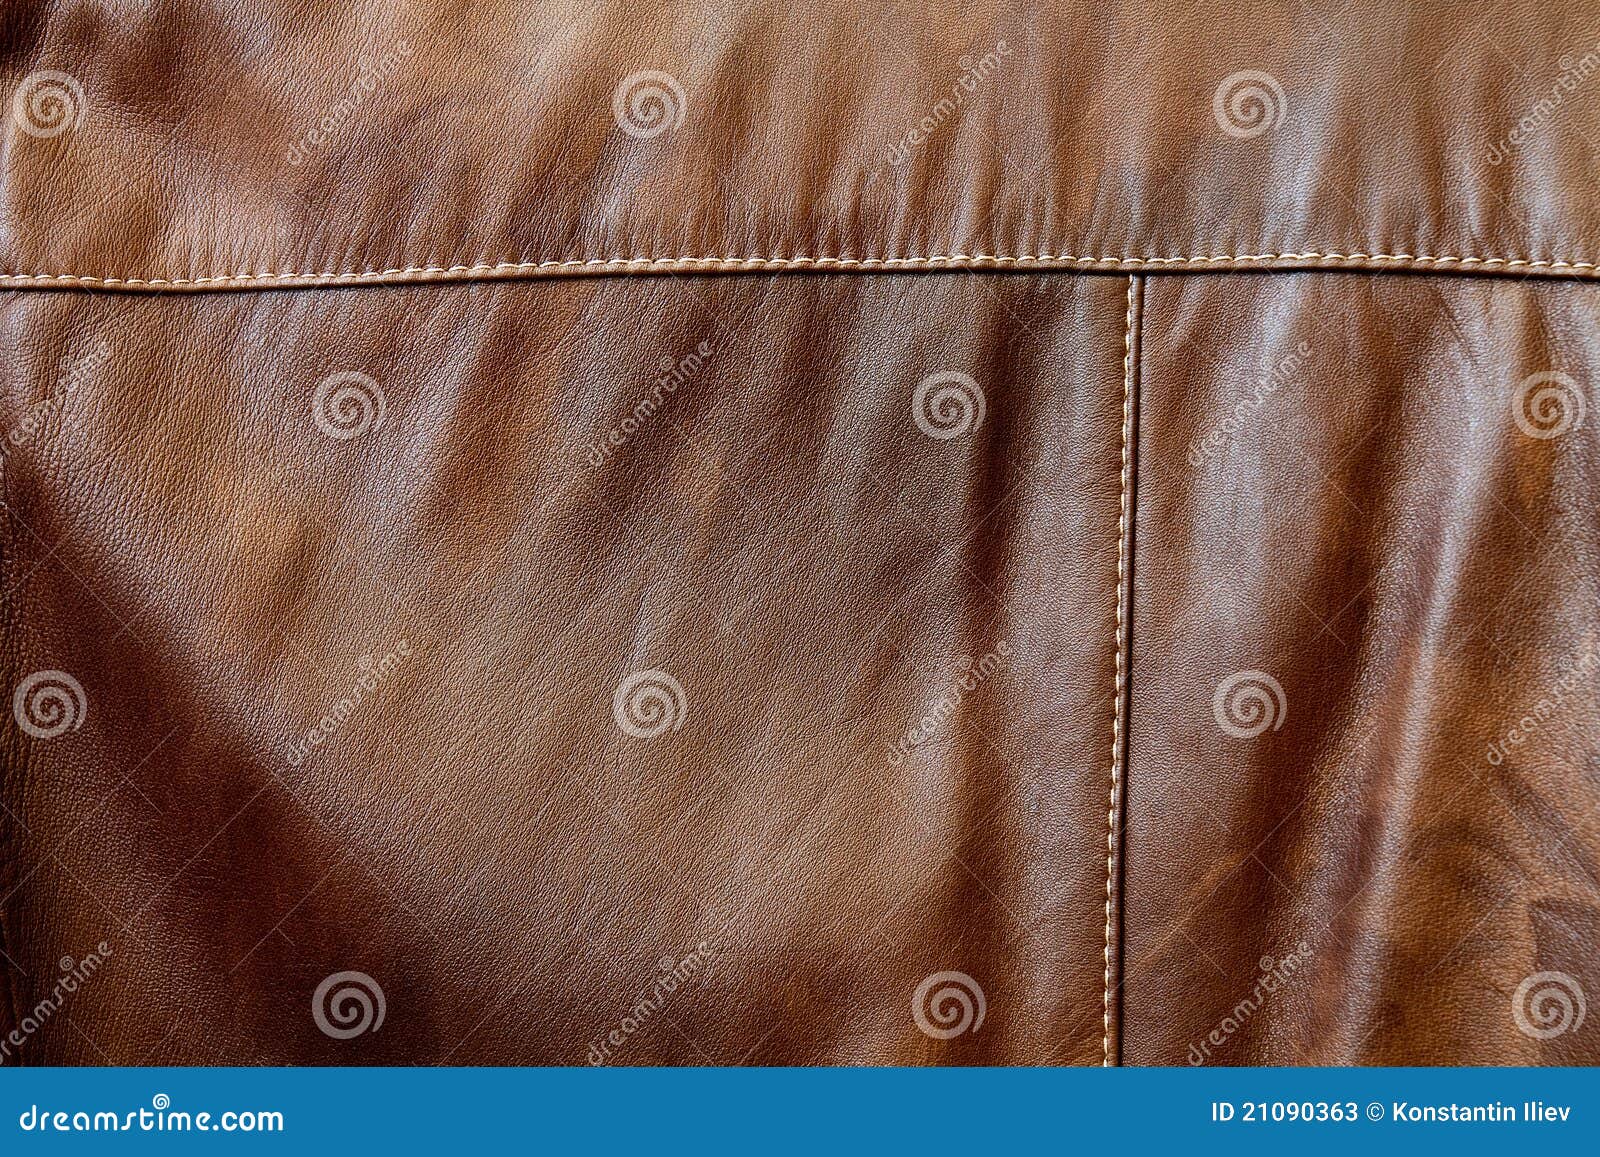 Brown leather texture stock image. Image of background - 21090363